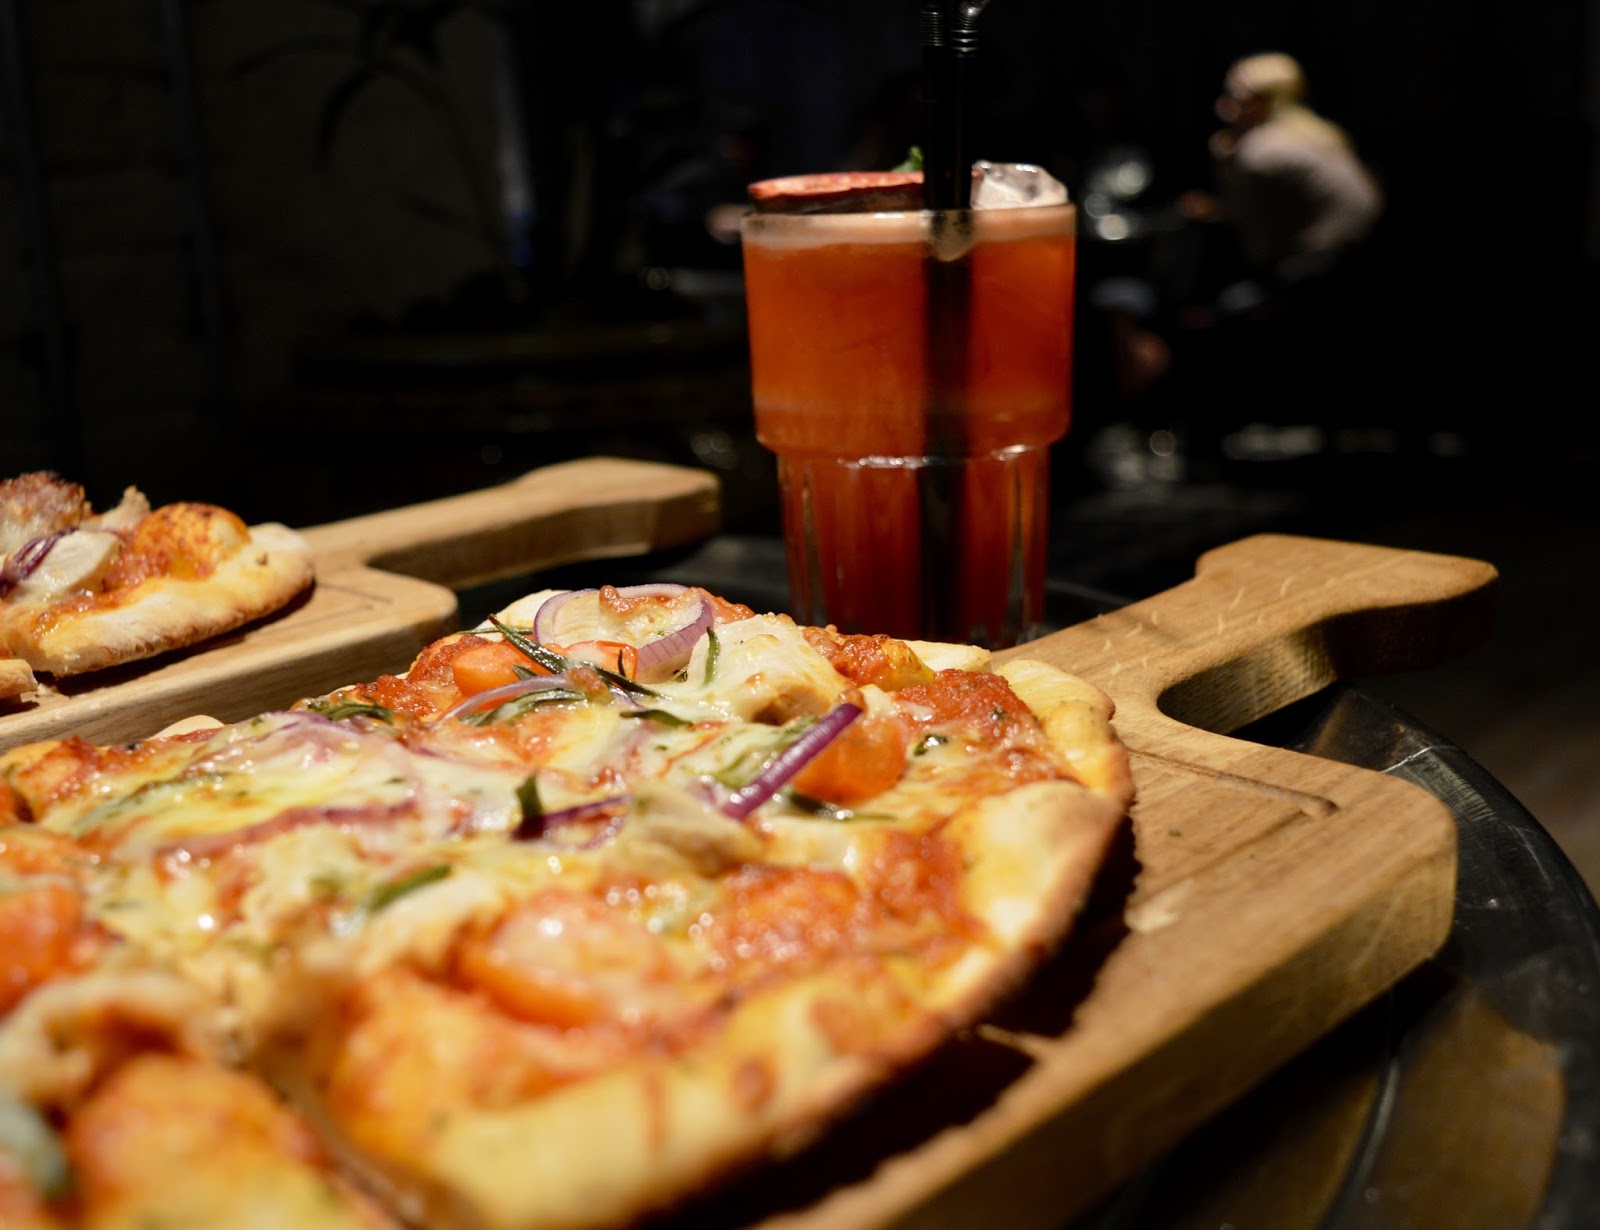 Yolo Townhouse Newcastle | A new venue to try for your next girl's night out - pizzas